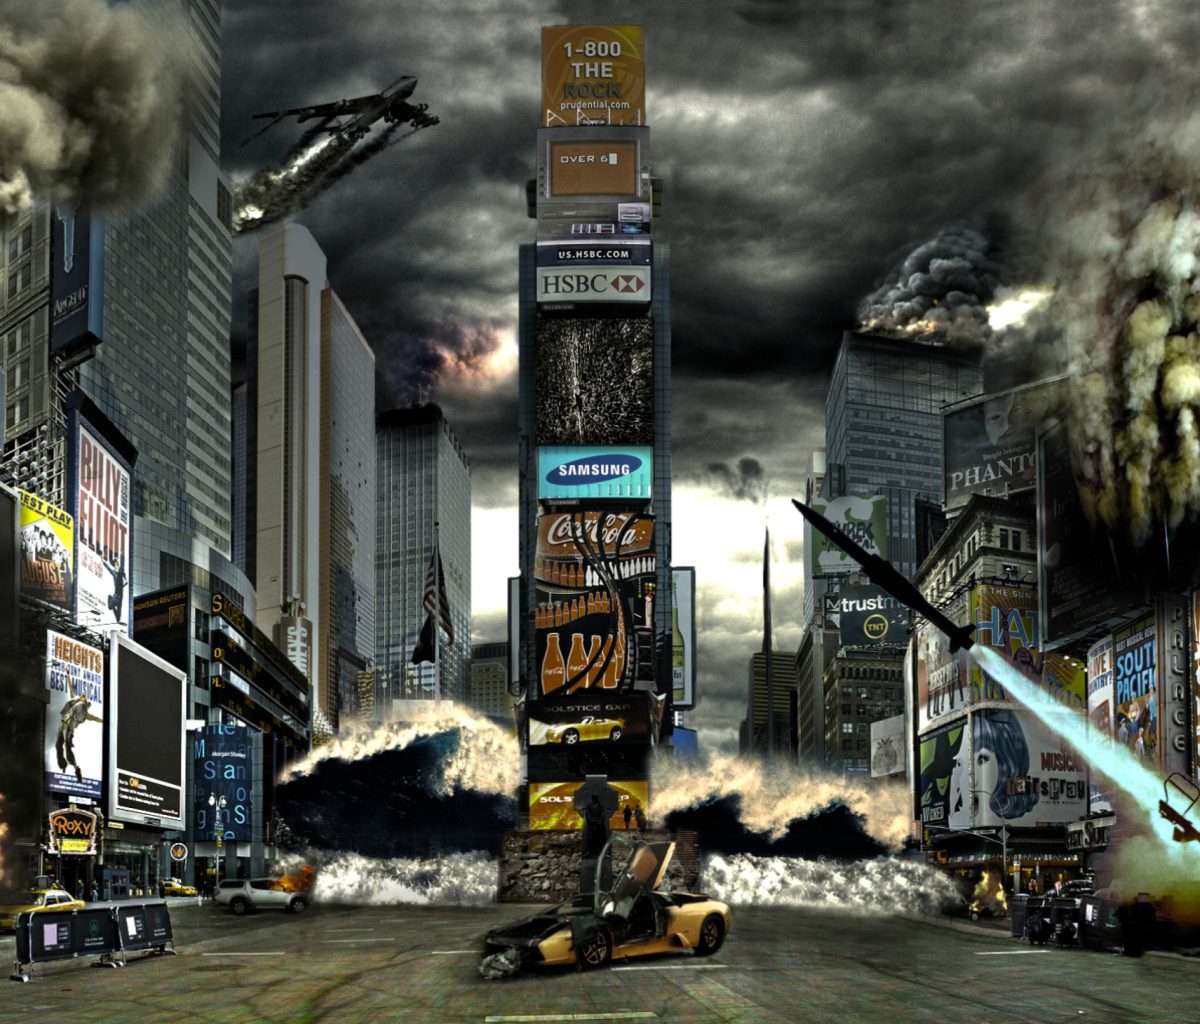 Times Square Disaster wallpaper 1200x1024